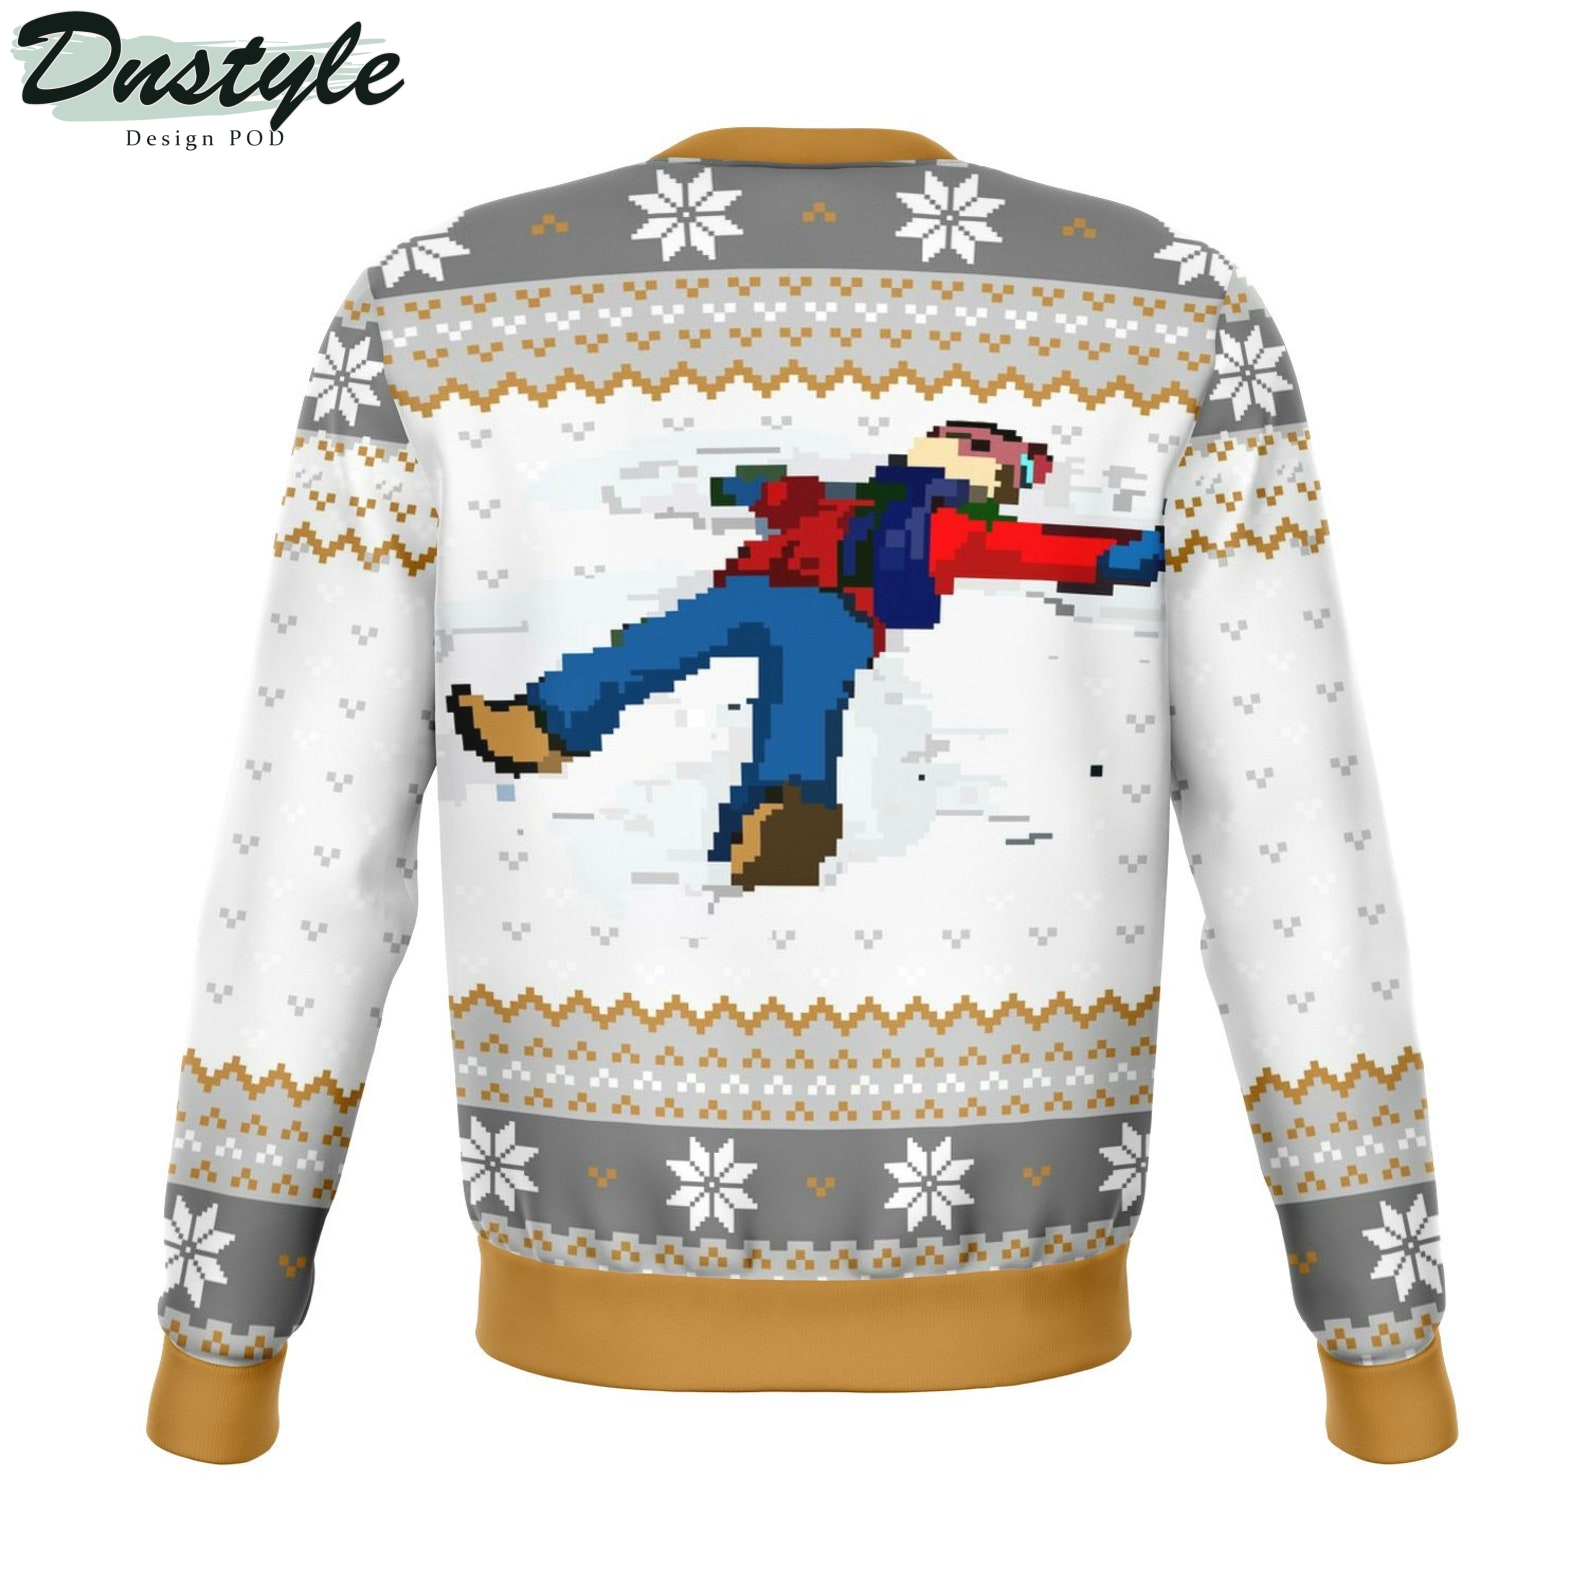 Lets Lie In The Snow And Pretend Dank 2022 Ugly Christmas Sweater